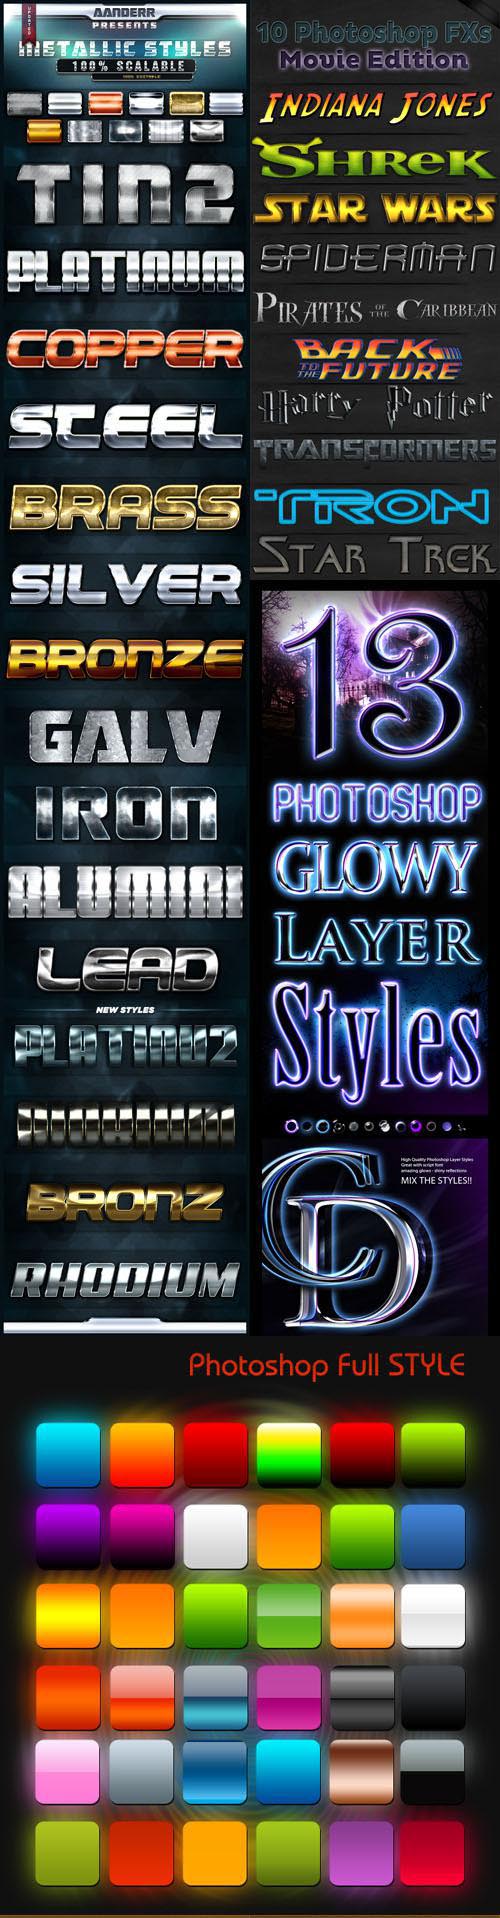 new text style in photoshop